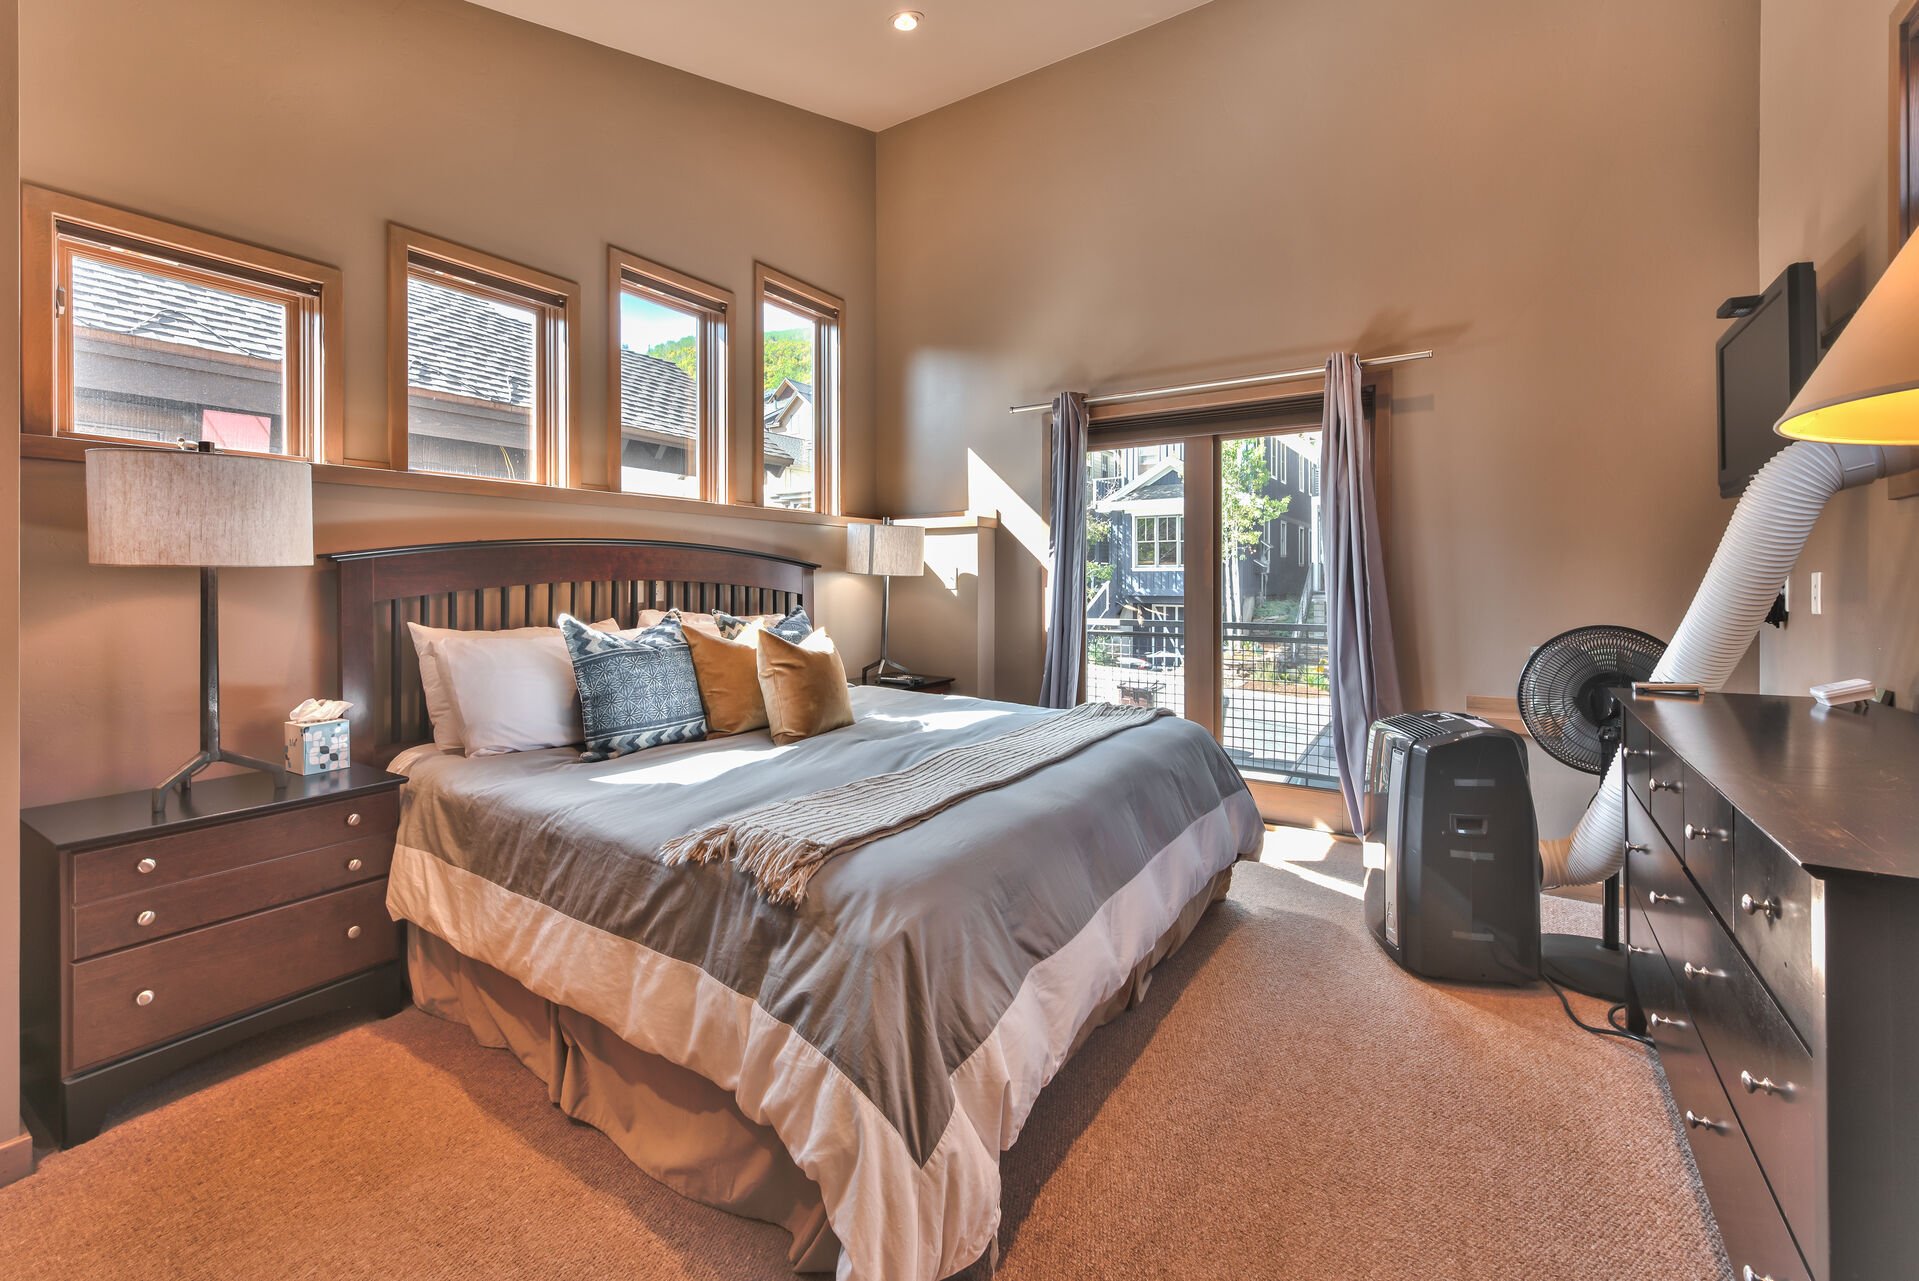 Level 4 - Master Bedroom with King Bed, Flat Screen TV, Private Bath and Deck